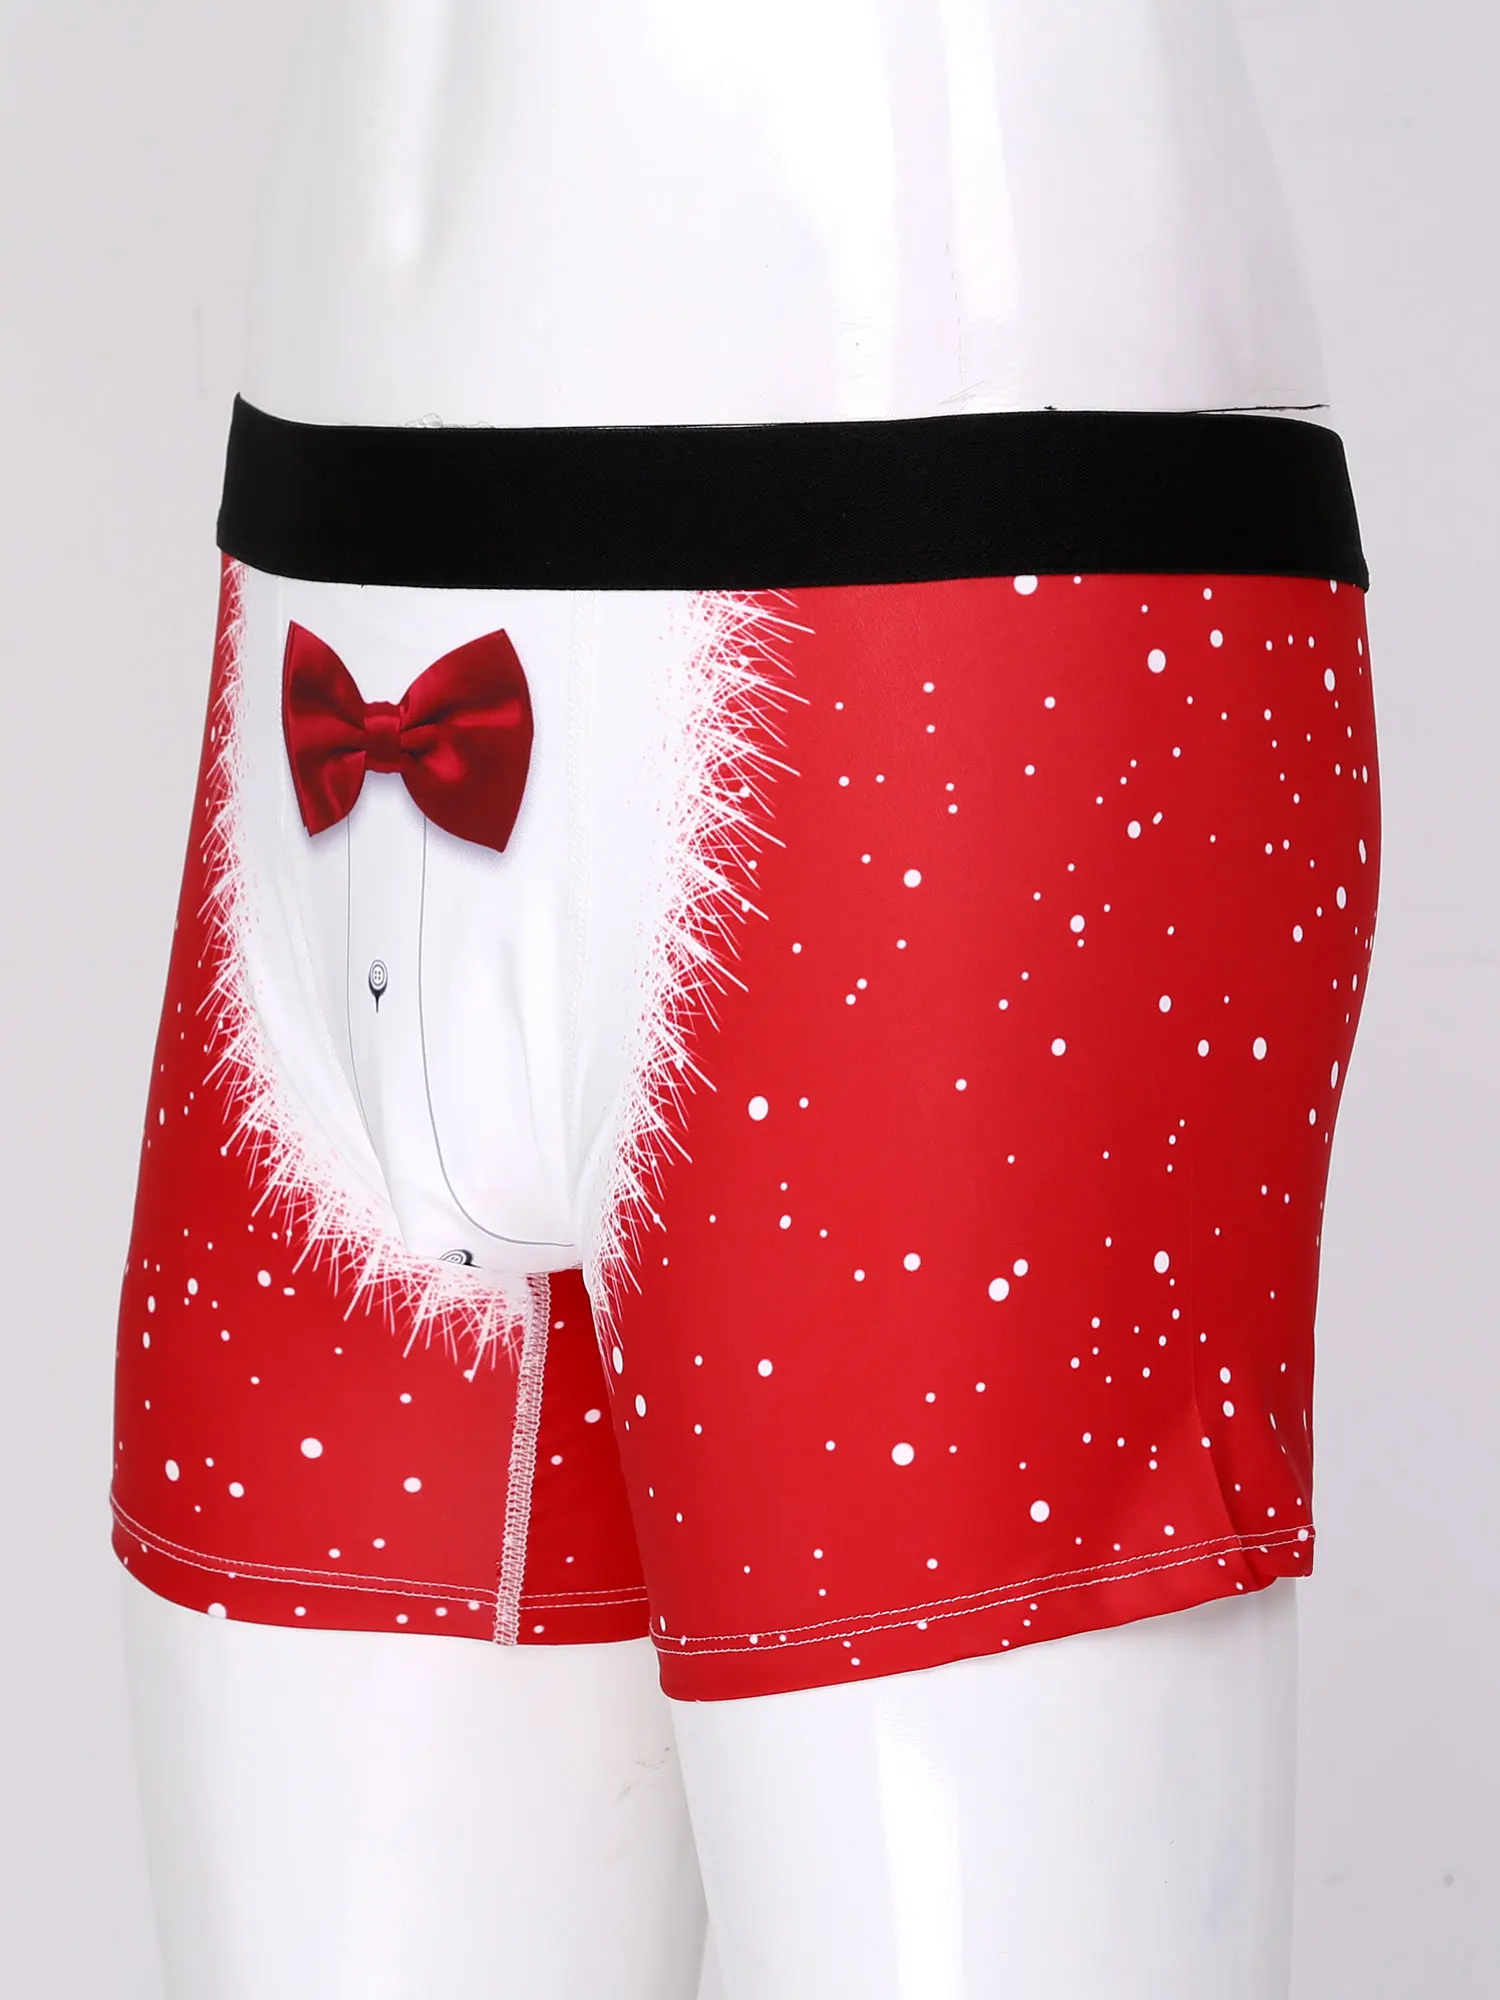 Sexy Christmas Printed Boxer Shorts for Mens Jockstraps Bulge Pouch Fancy Underwear Underpants Lingerie Christmas Hot Shorts socks and tights